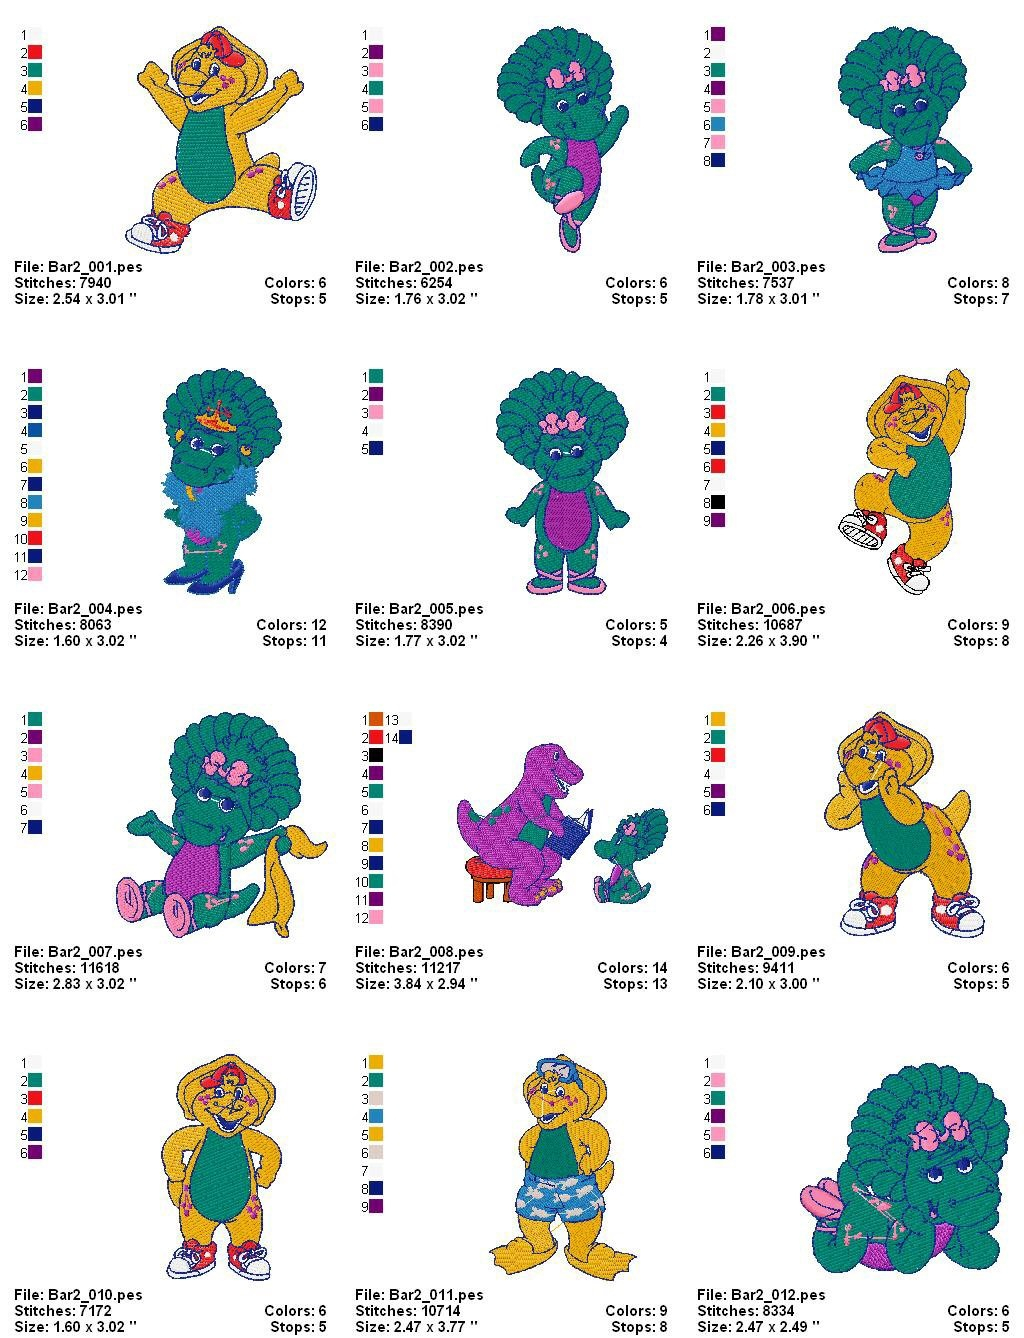 Embroidery Machine Patterns Designs Barney Cartoon Embroidery Machine Designs Patterns